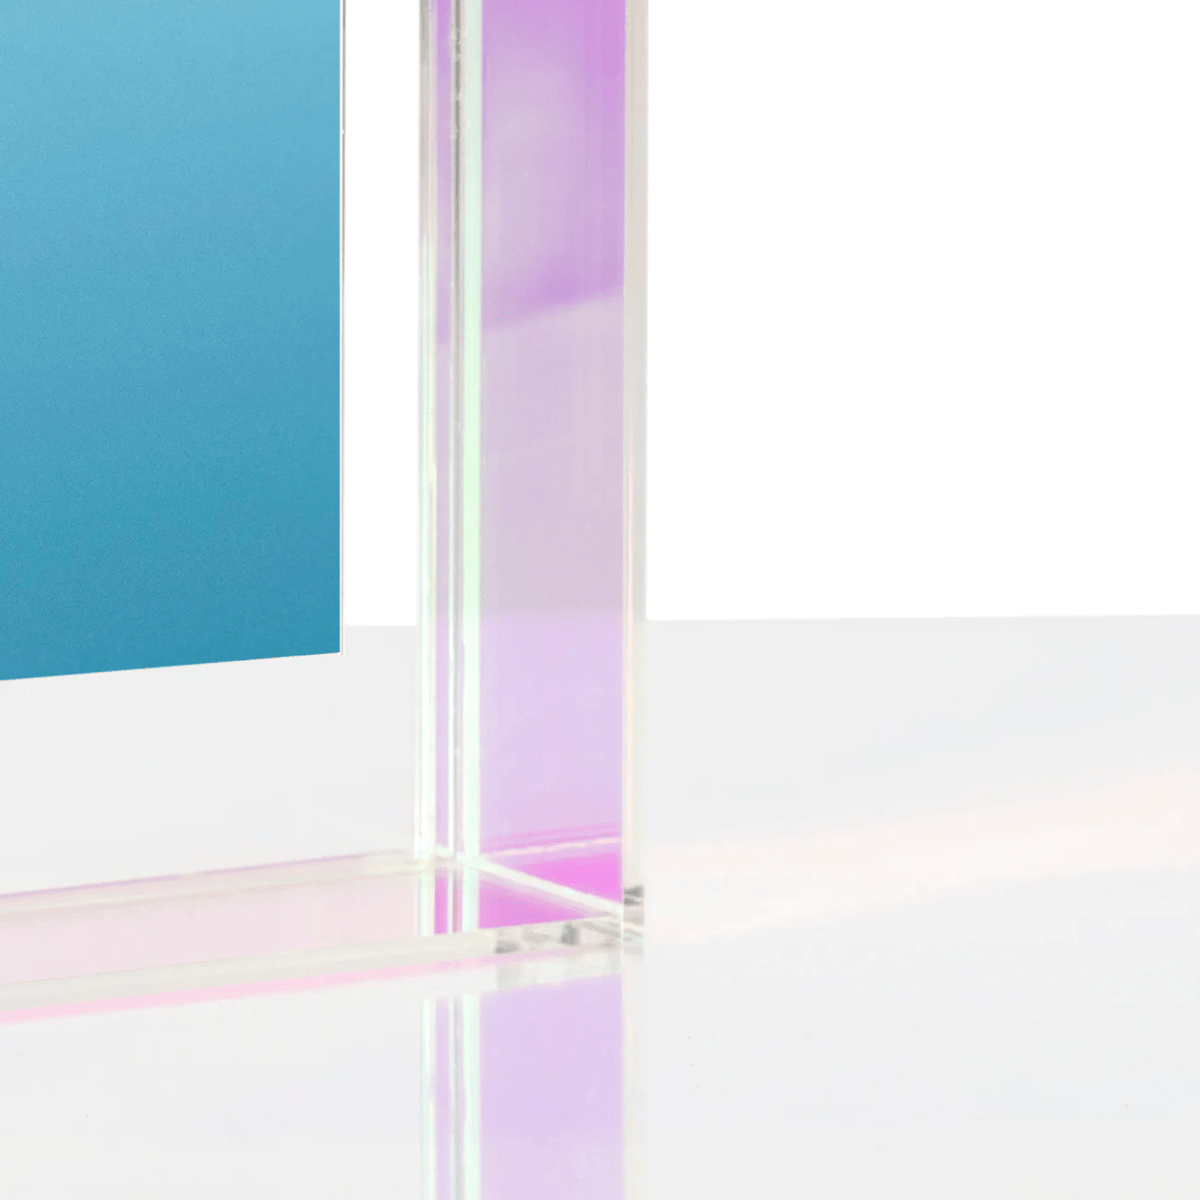 A close up image of a clear block frame